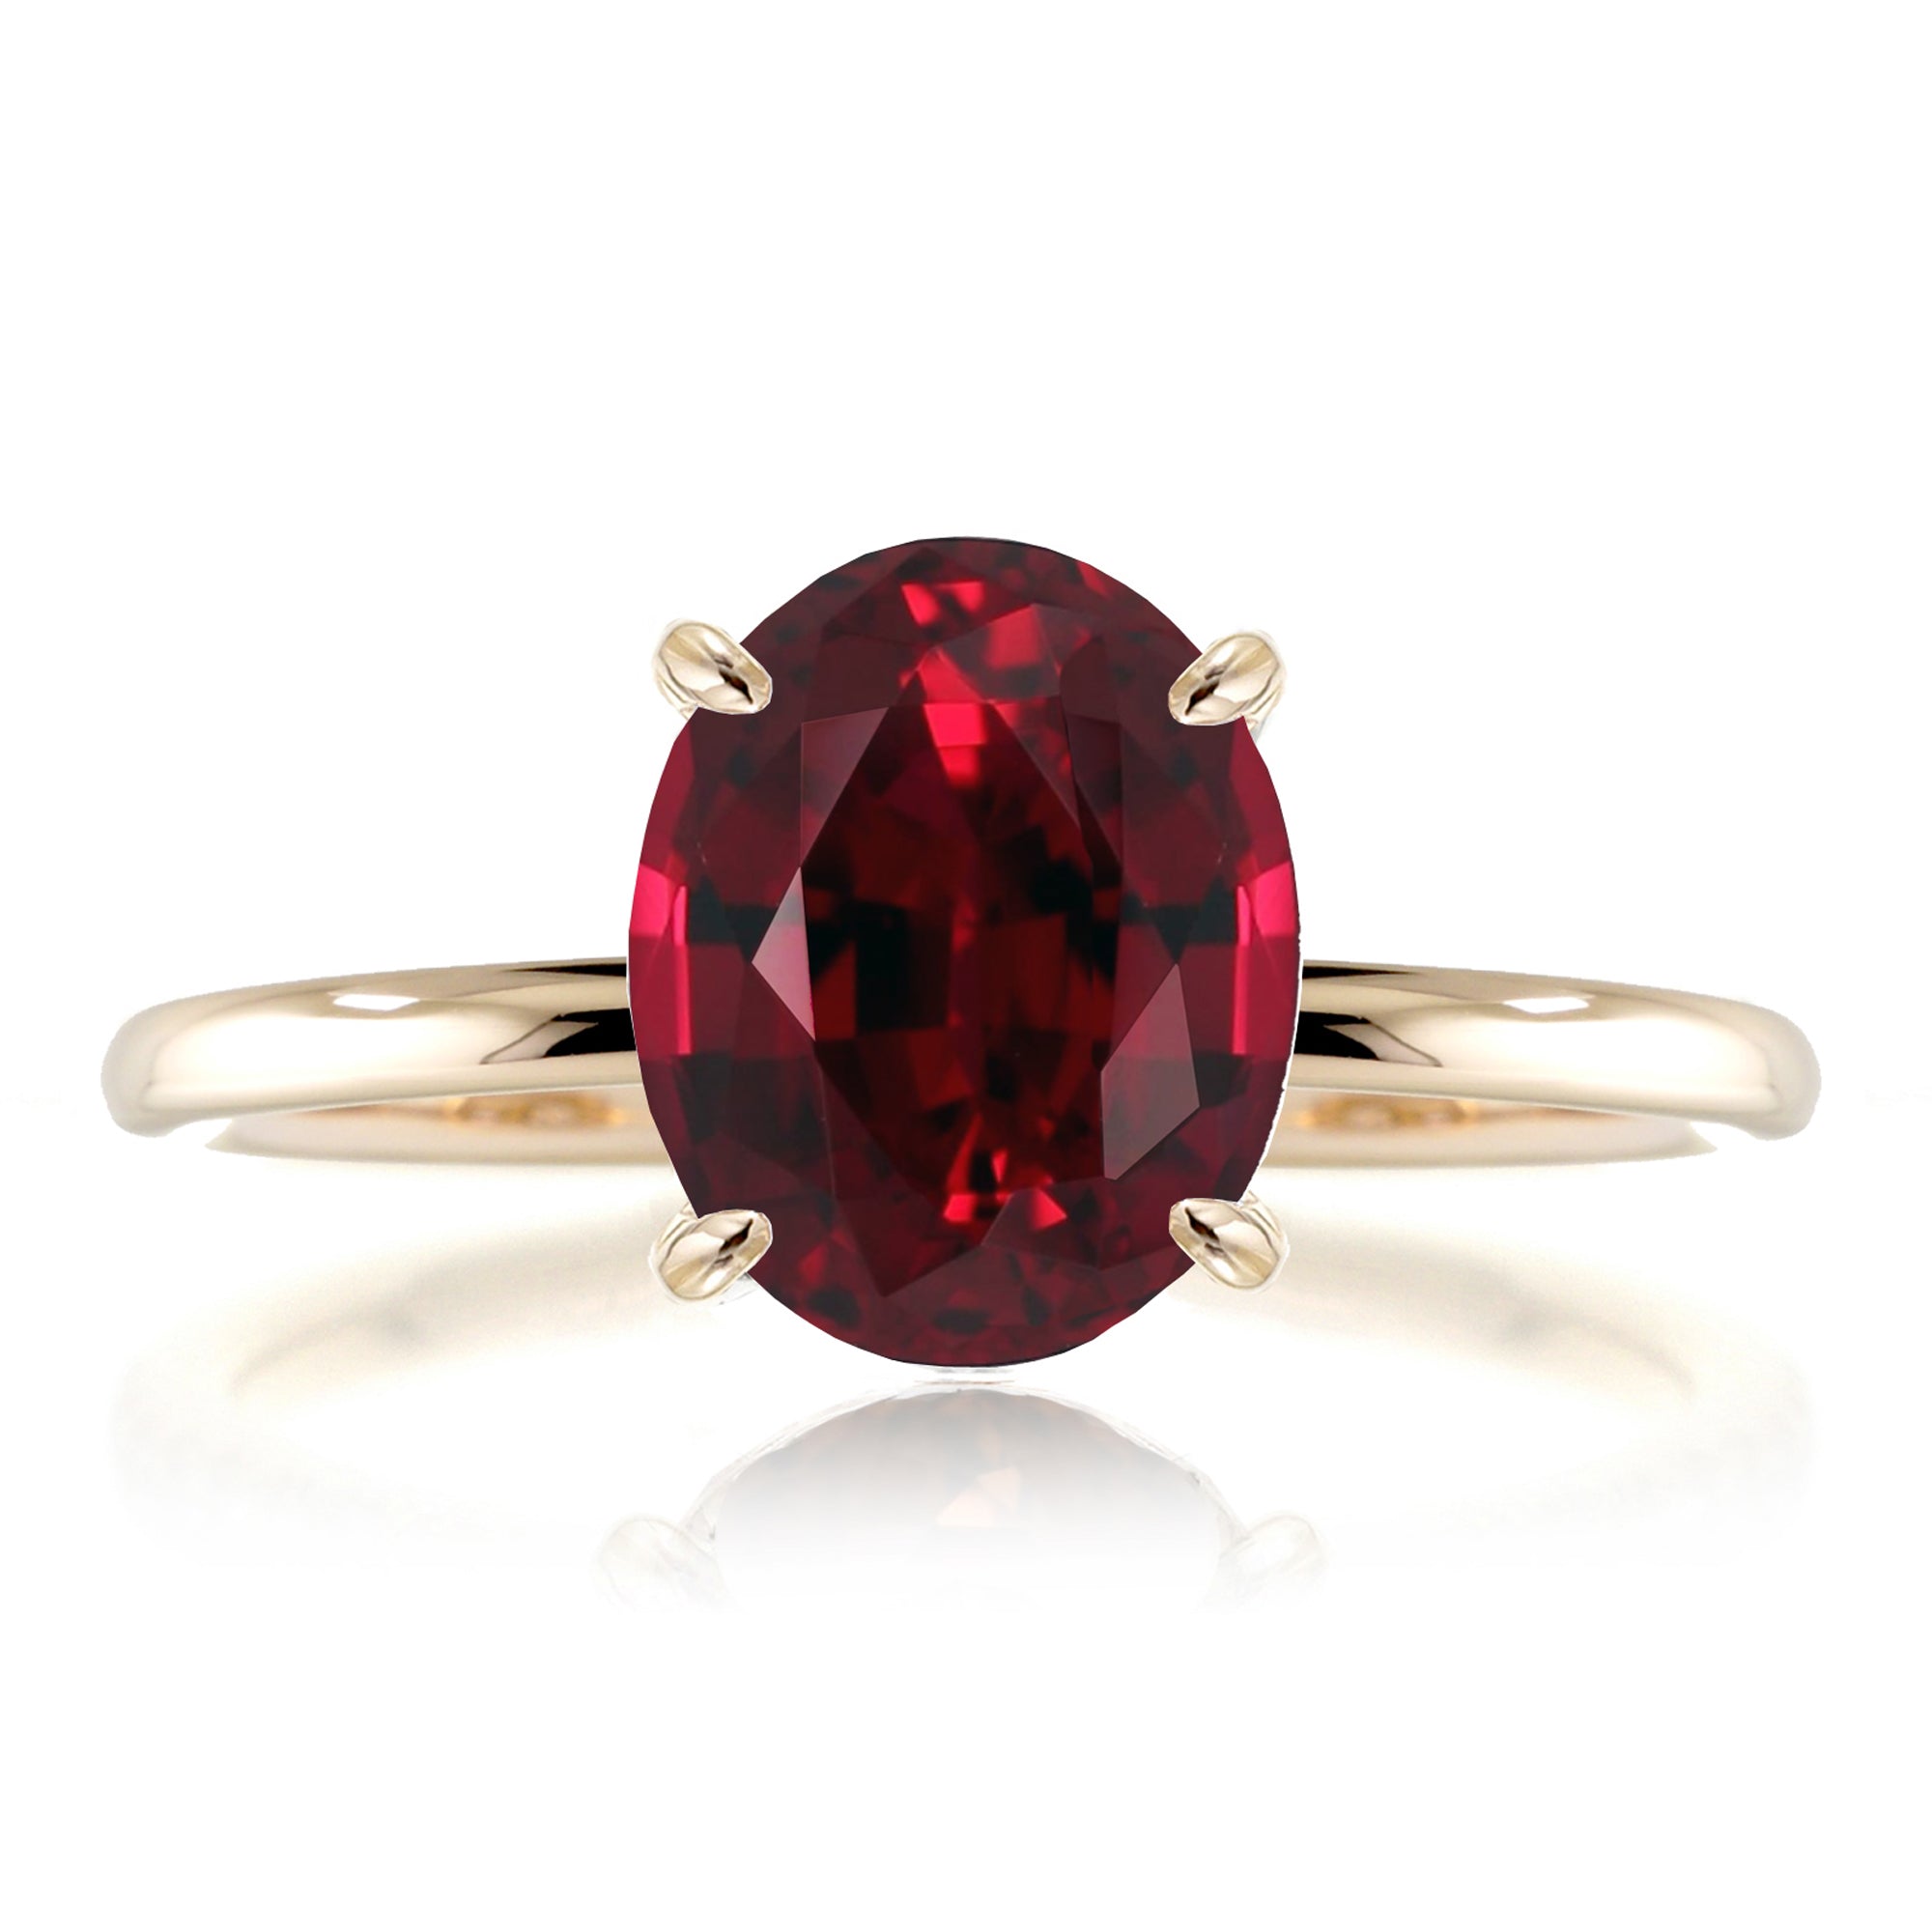 The Ava Oval Lab-Grown Ruby